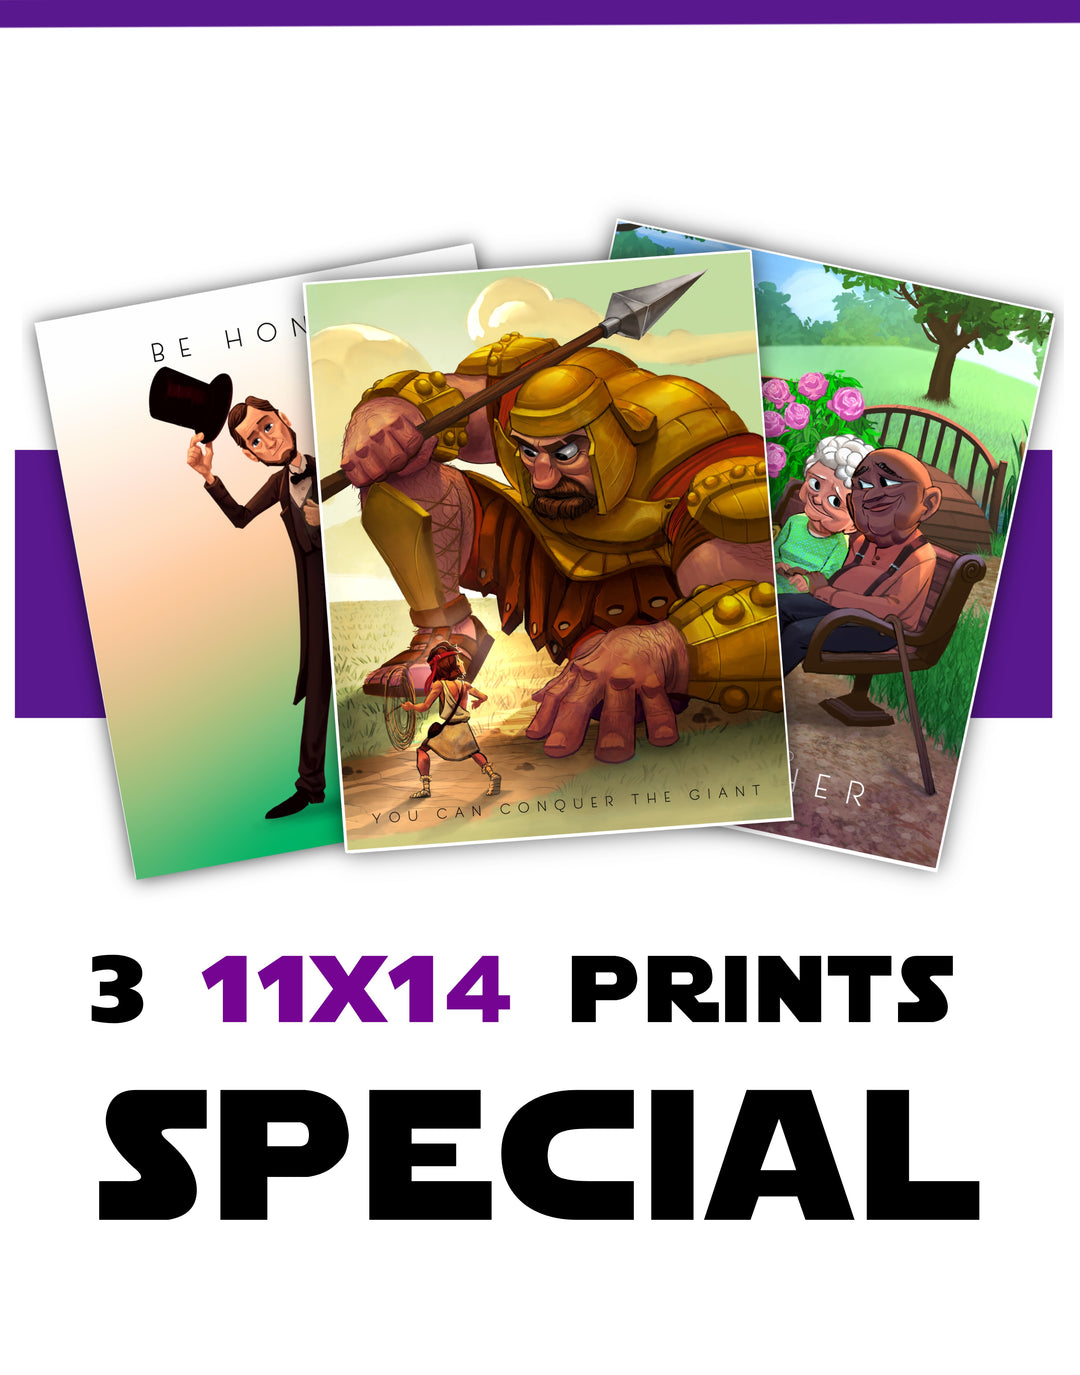 3 Print Special